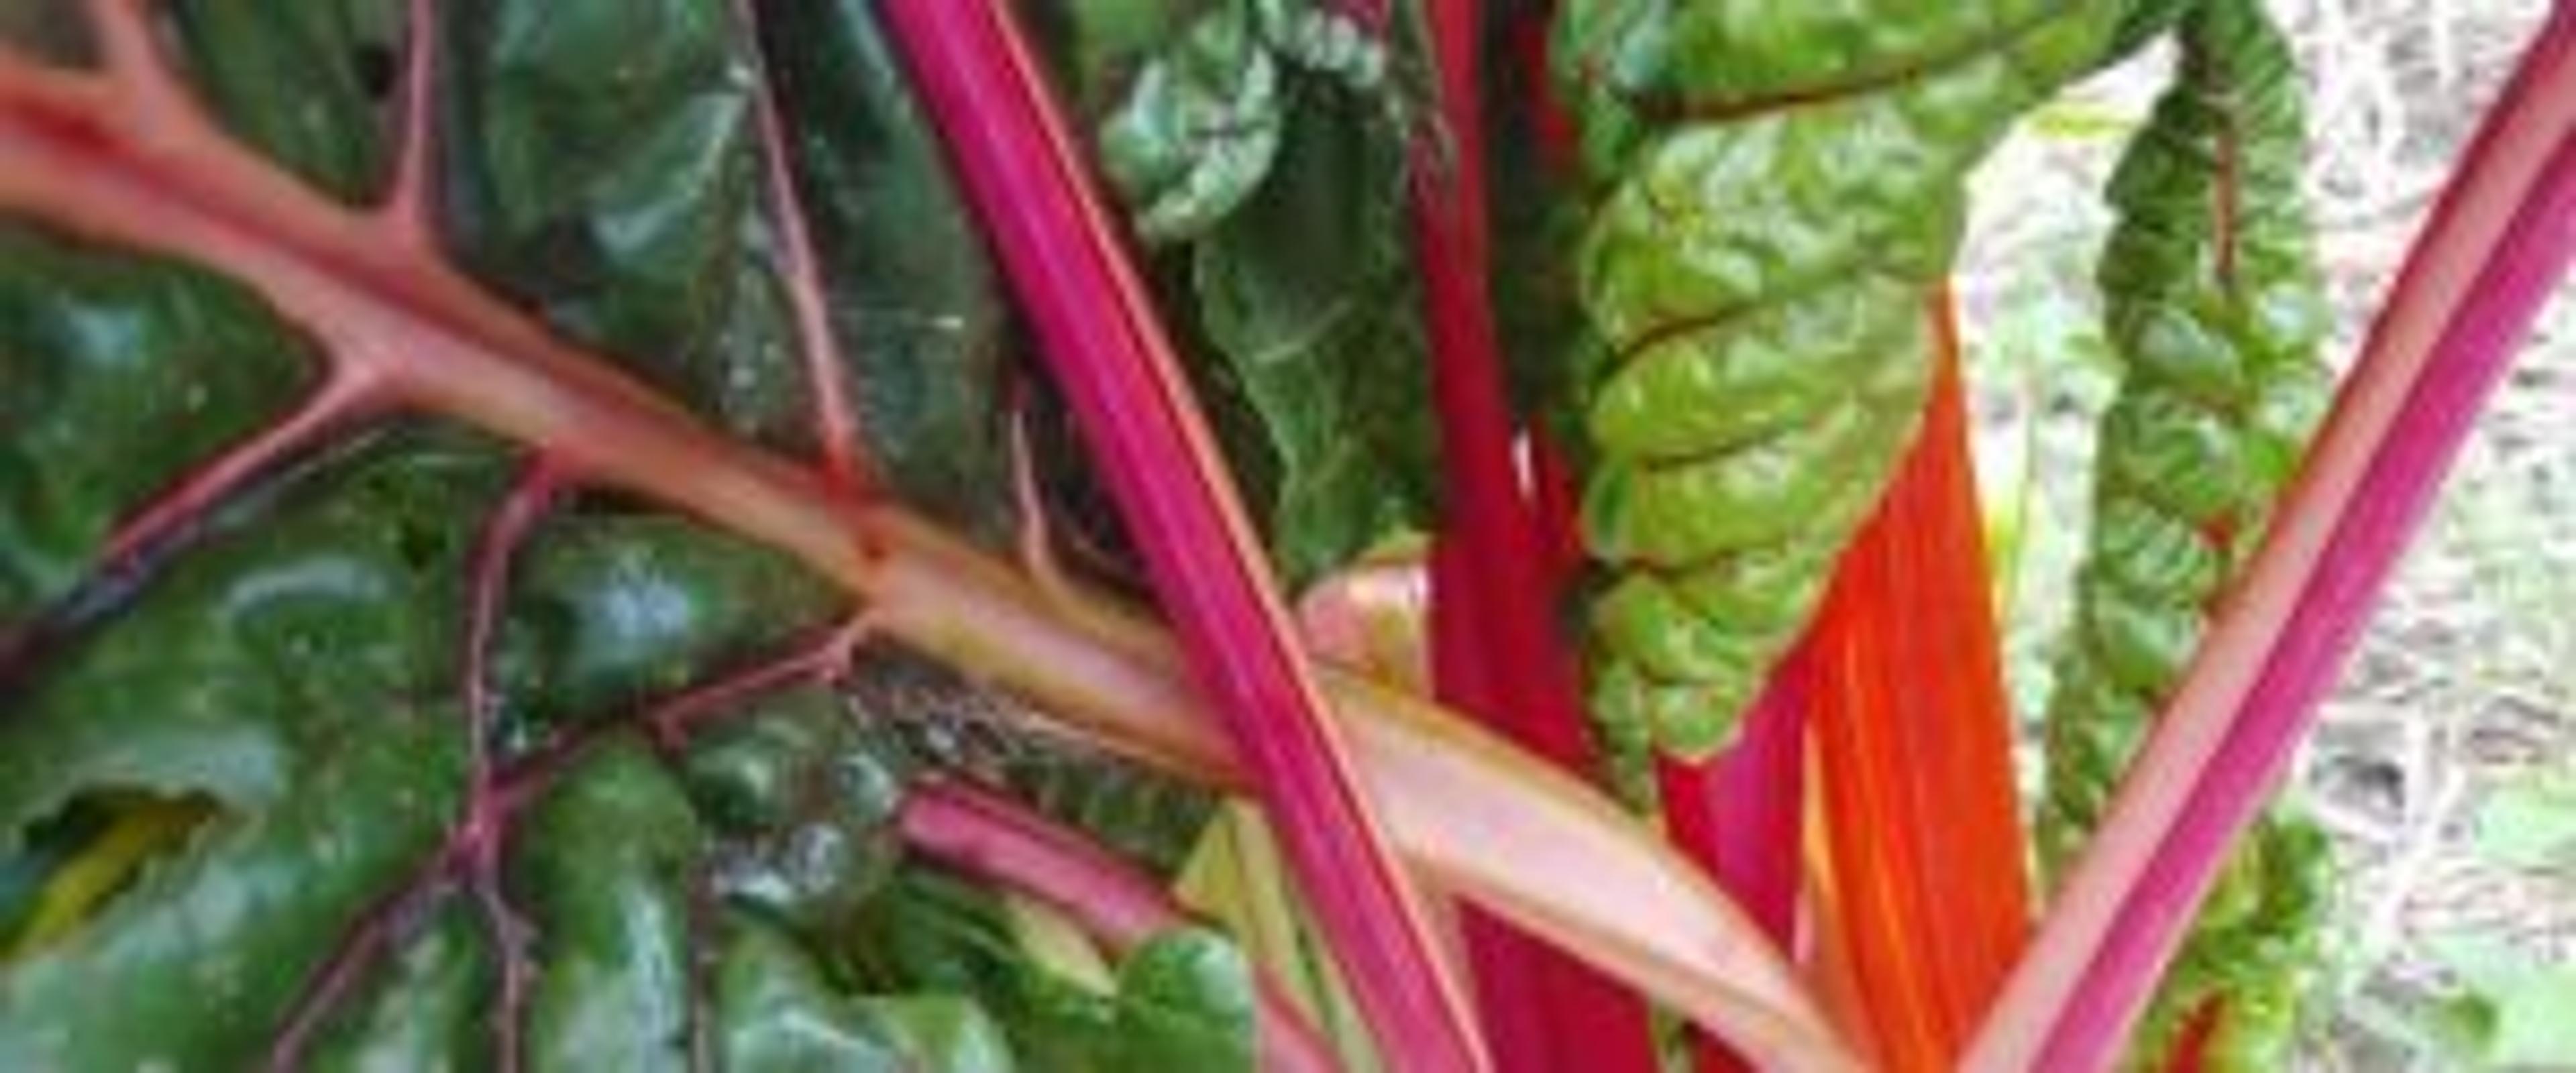 Chard from KCL Garden